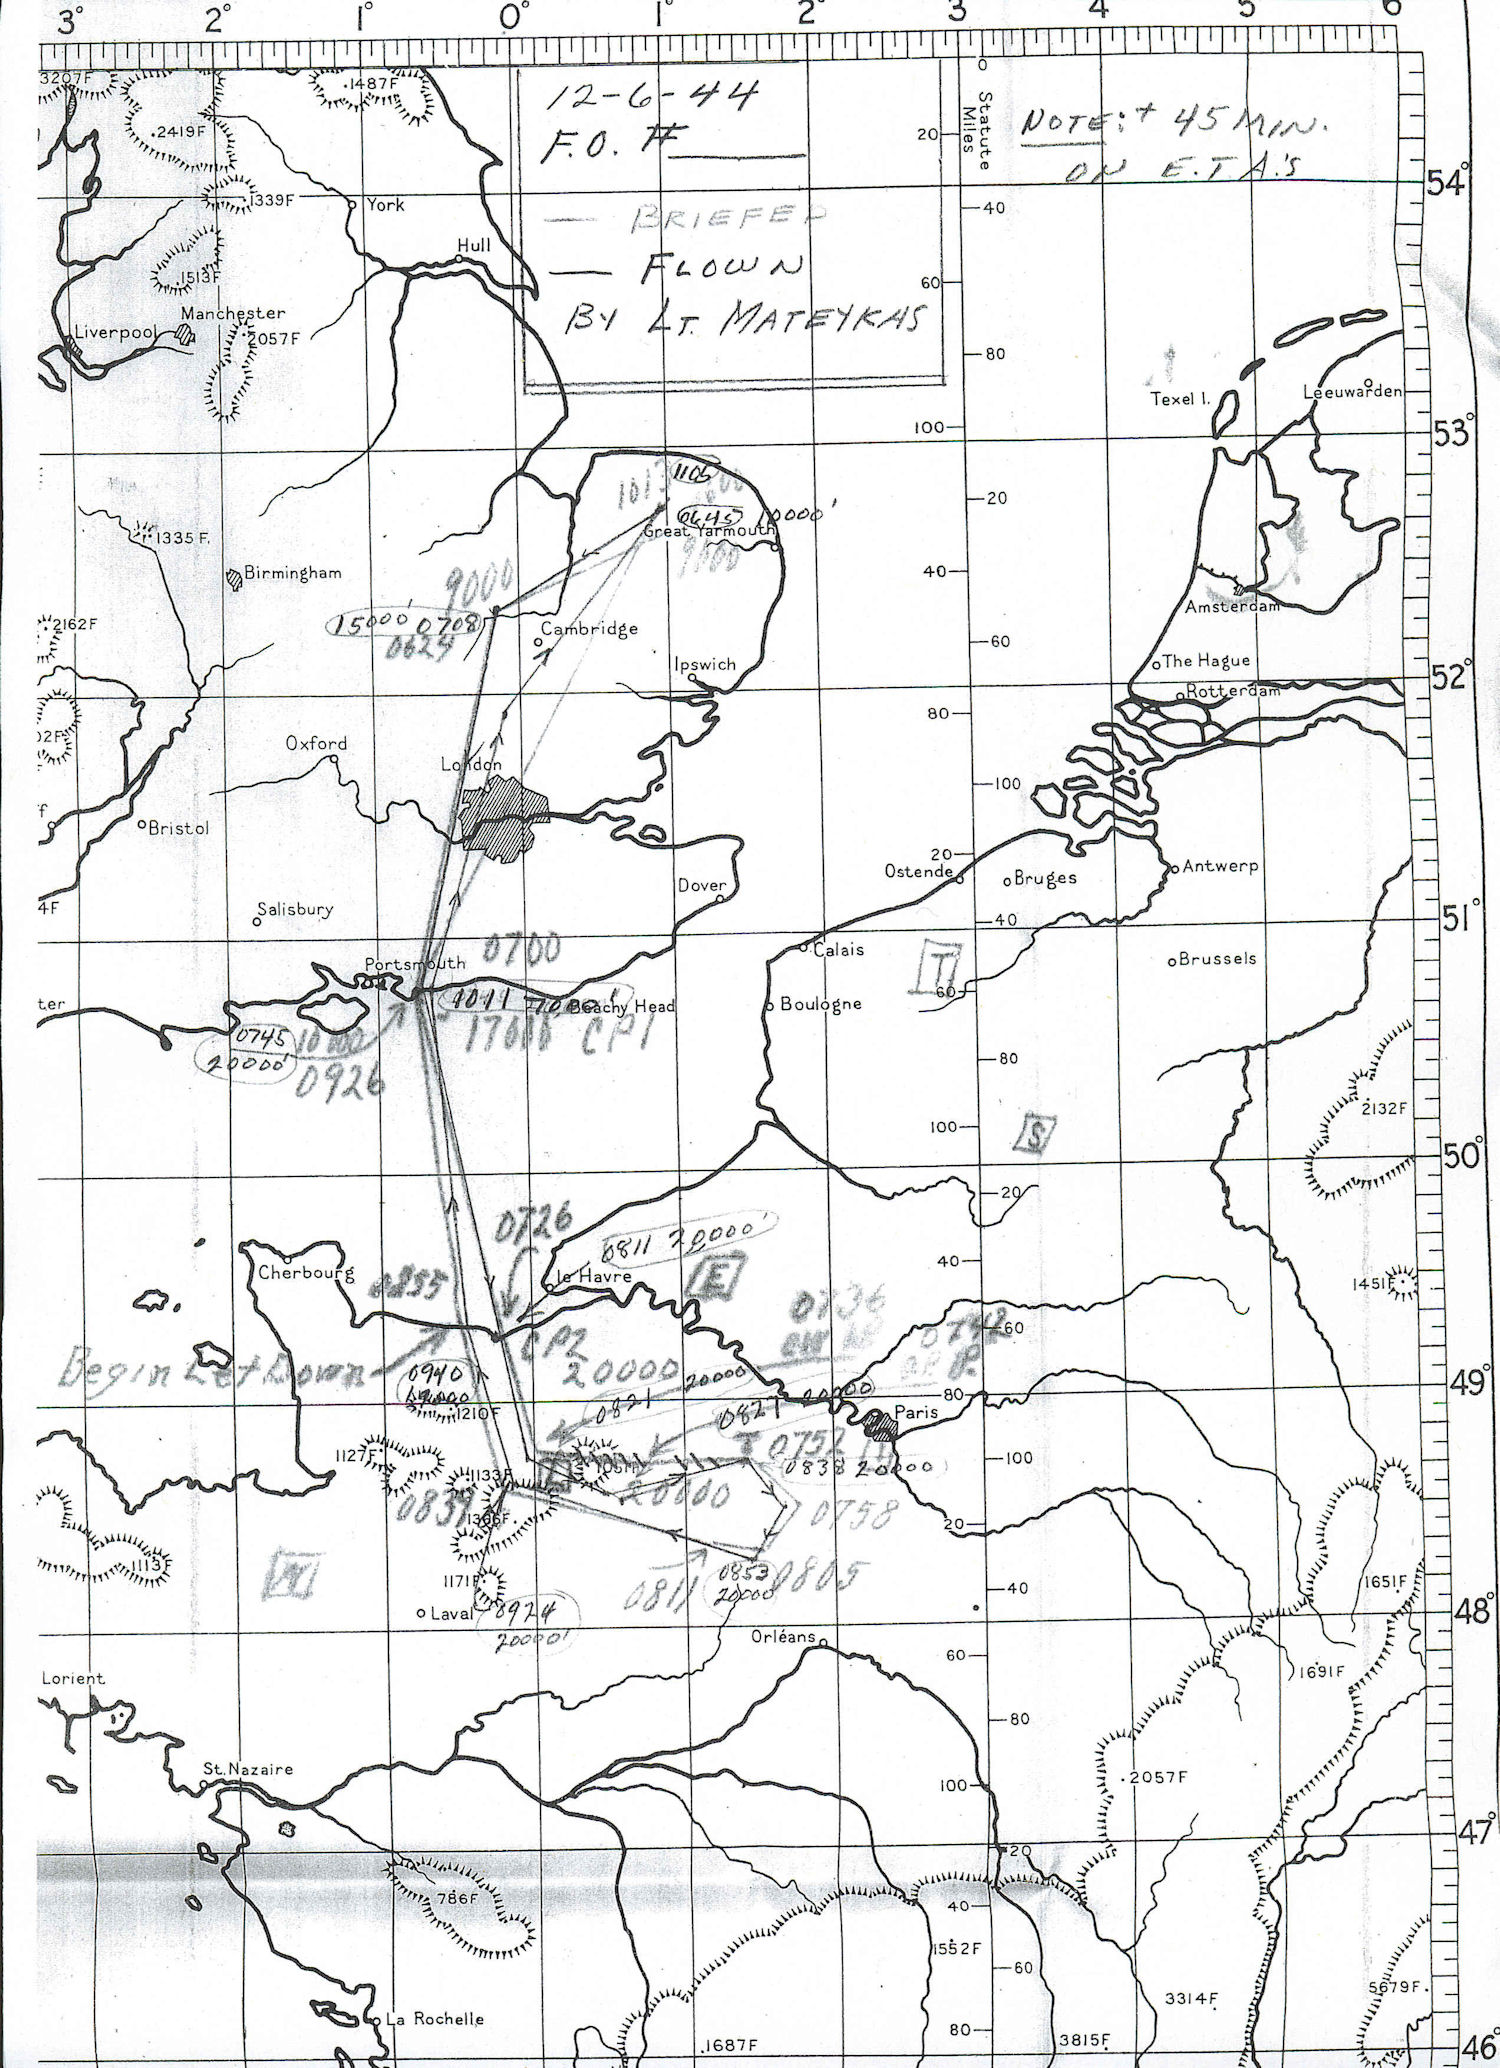 Route map 12June44